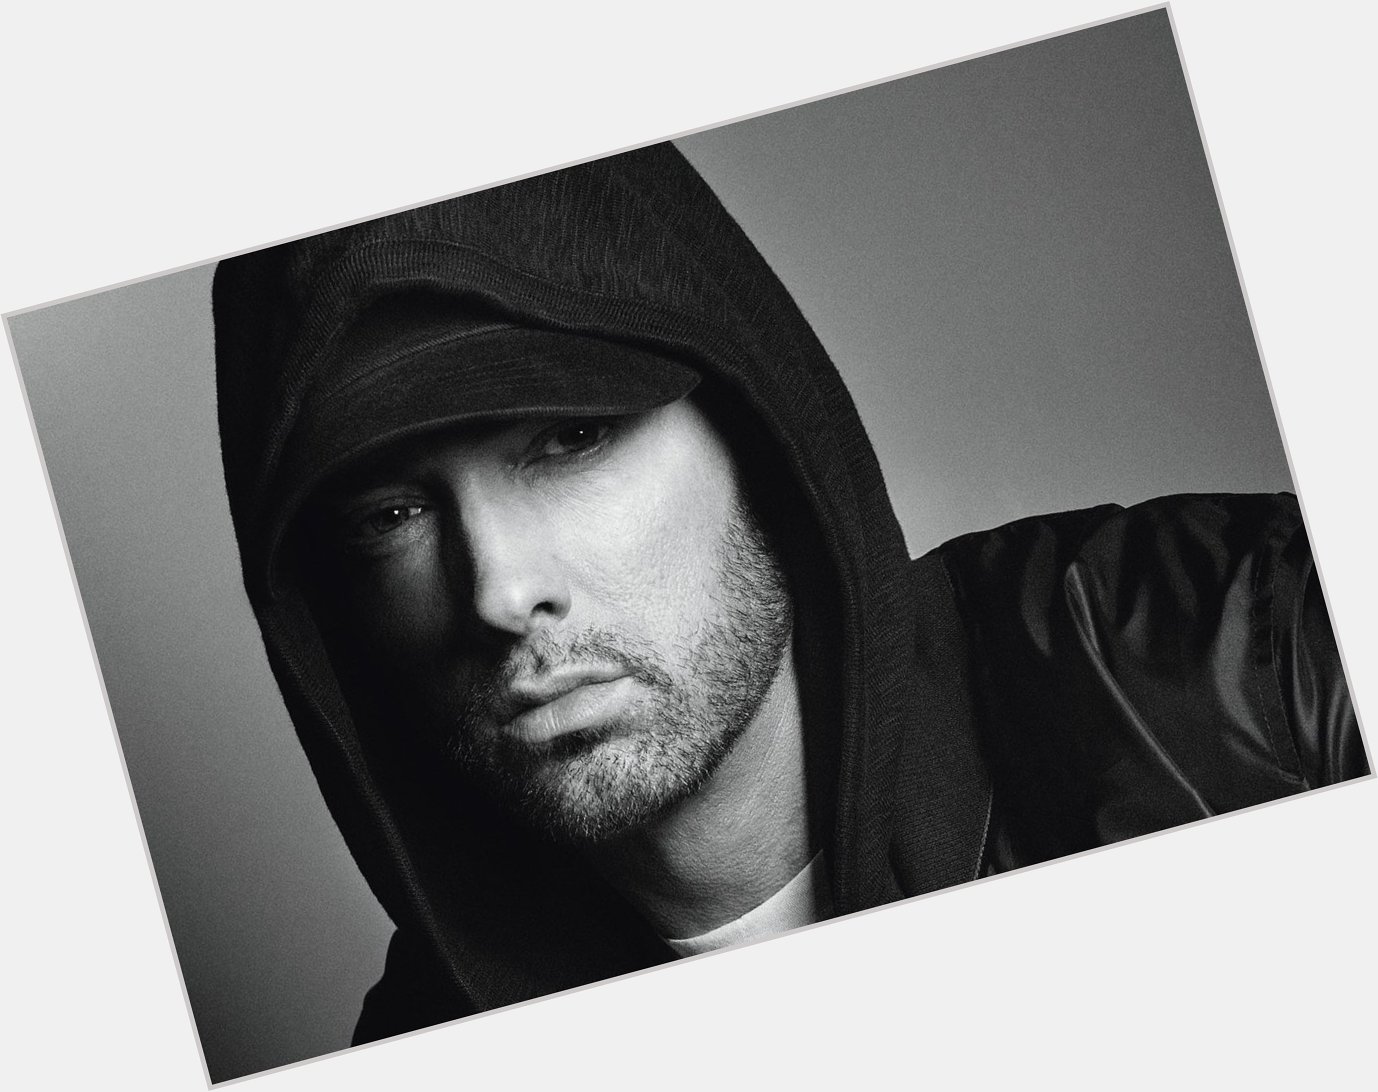 Happy 48th birthday to Eminem who was born on October 17, 1972.  